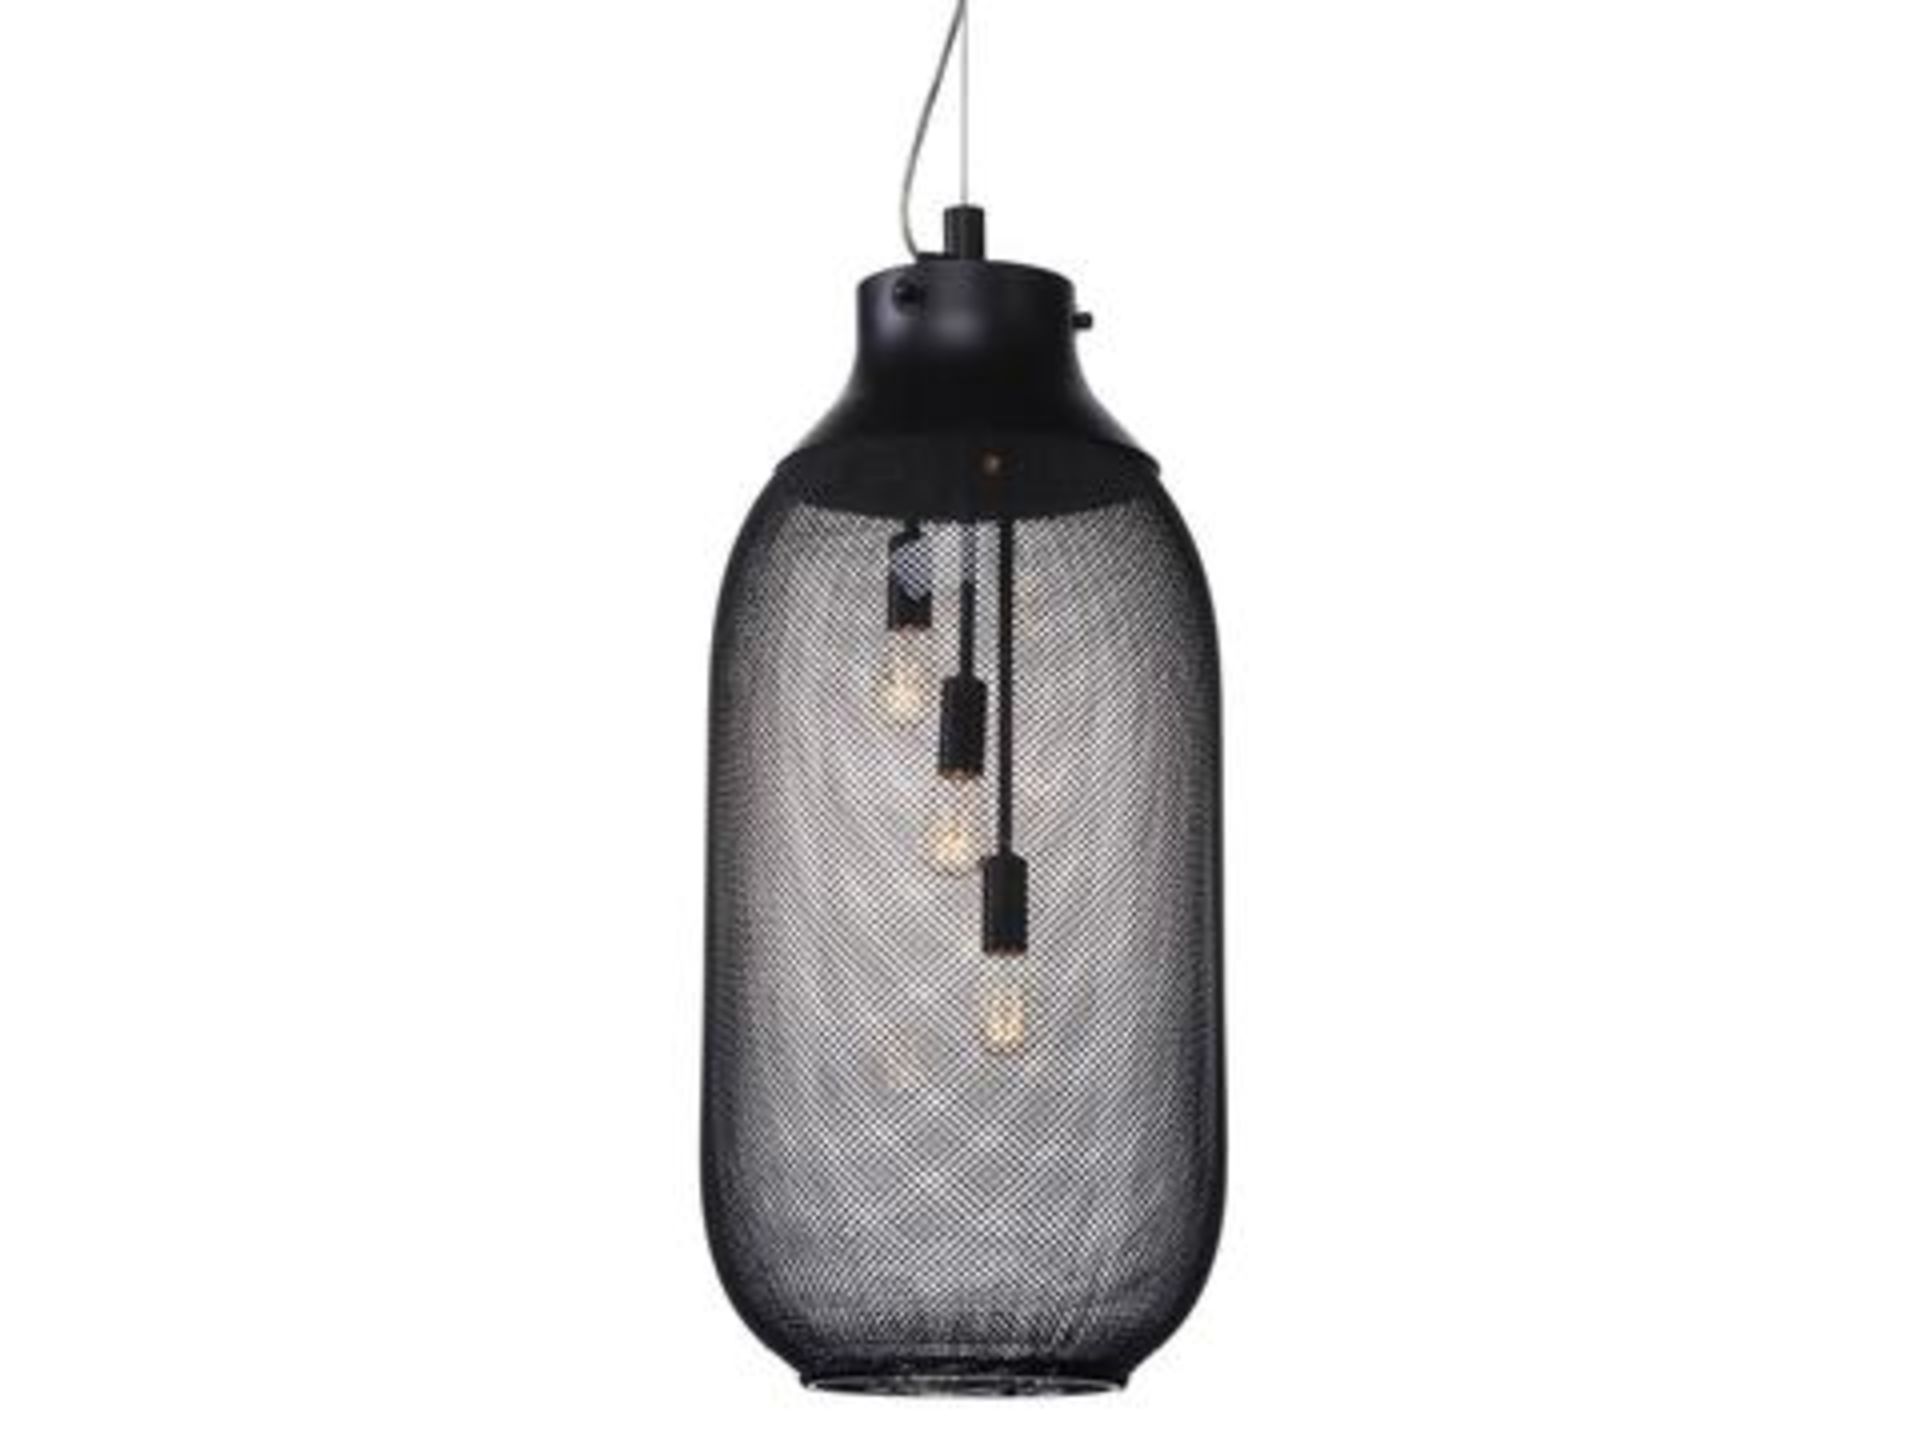 Syphon Pendant (UK) Matt Black Mesh Inspired By 1920s Vintage Soda Syphons Used By Barmen To Add A - Image 2 of 2